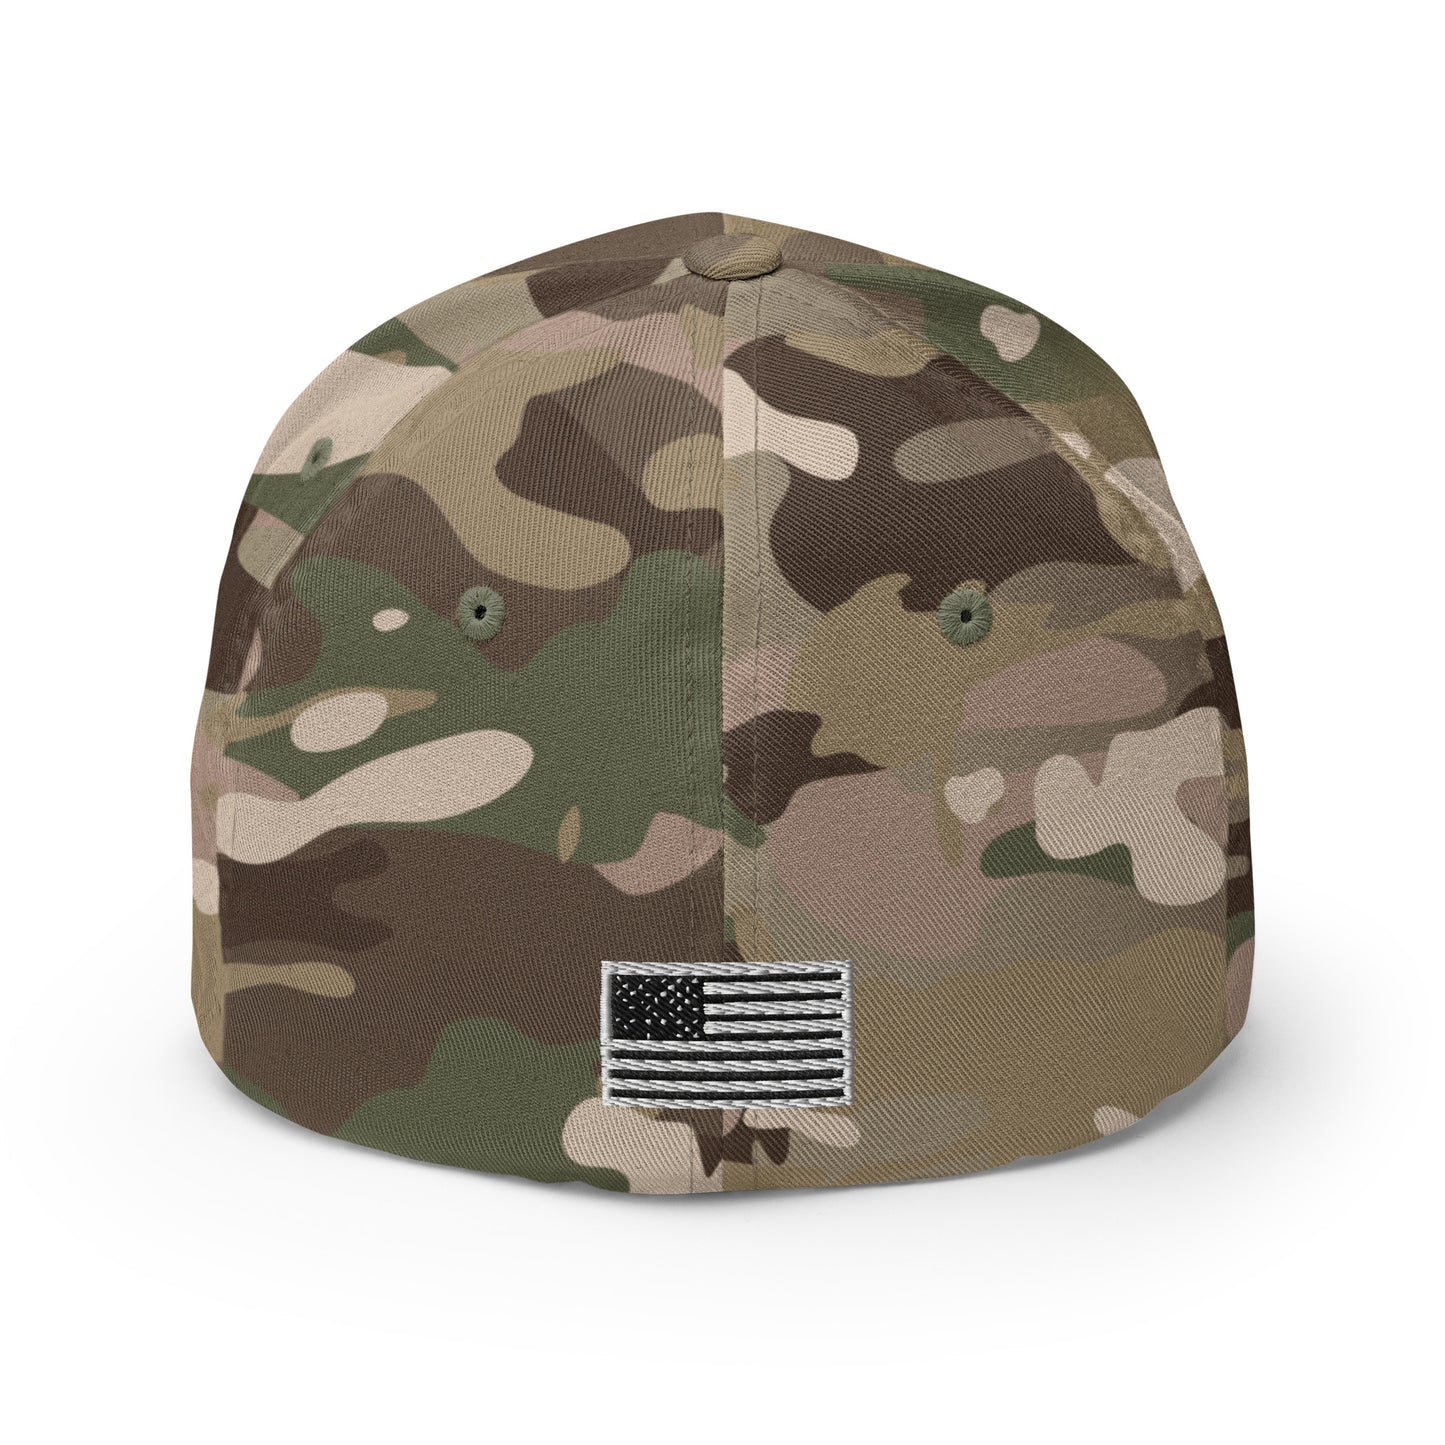 US Army Structured Twill Cap